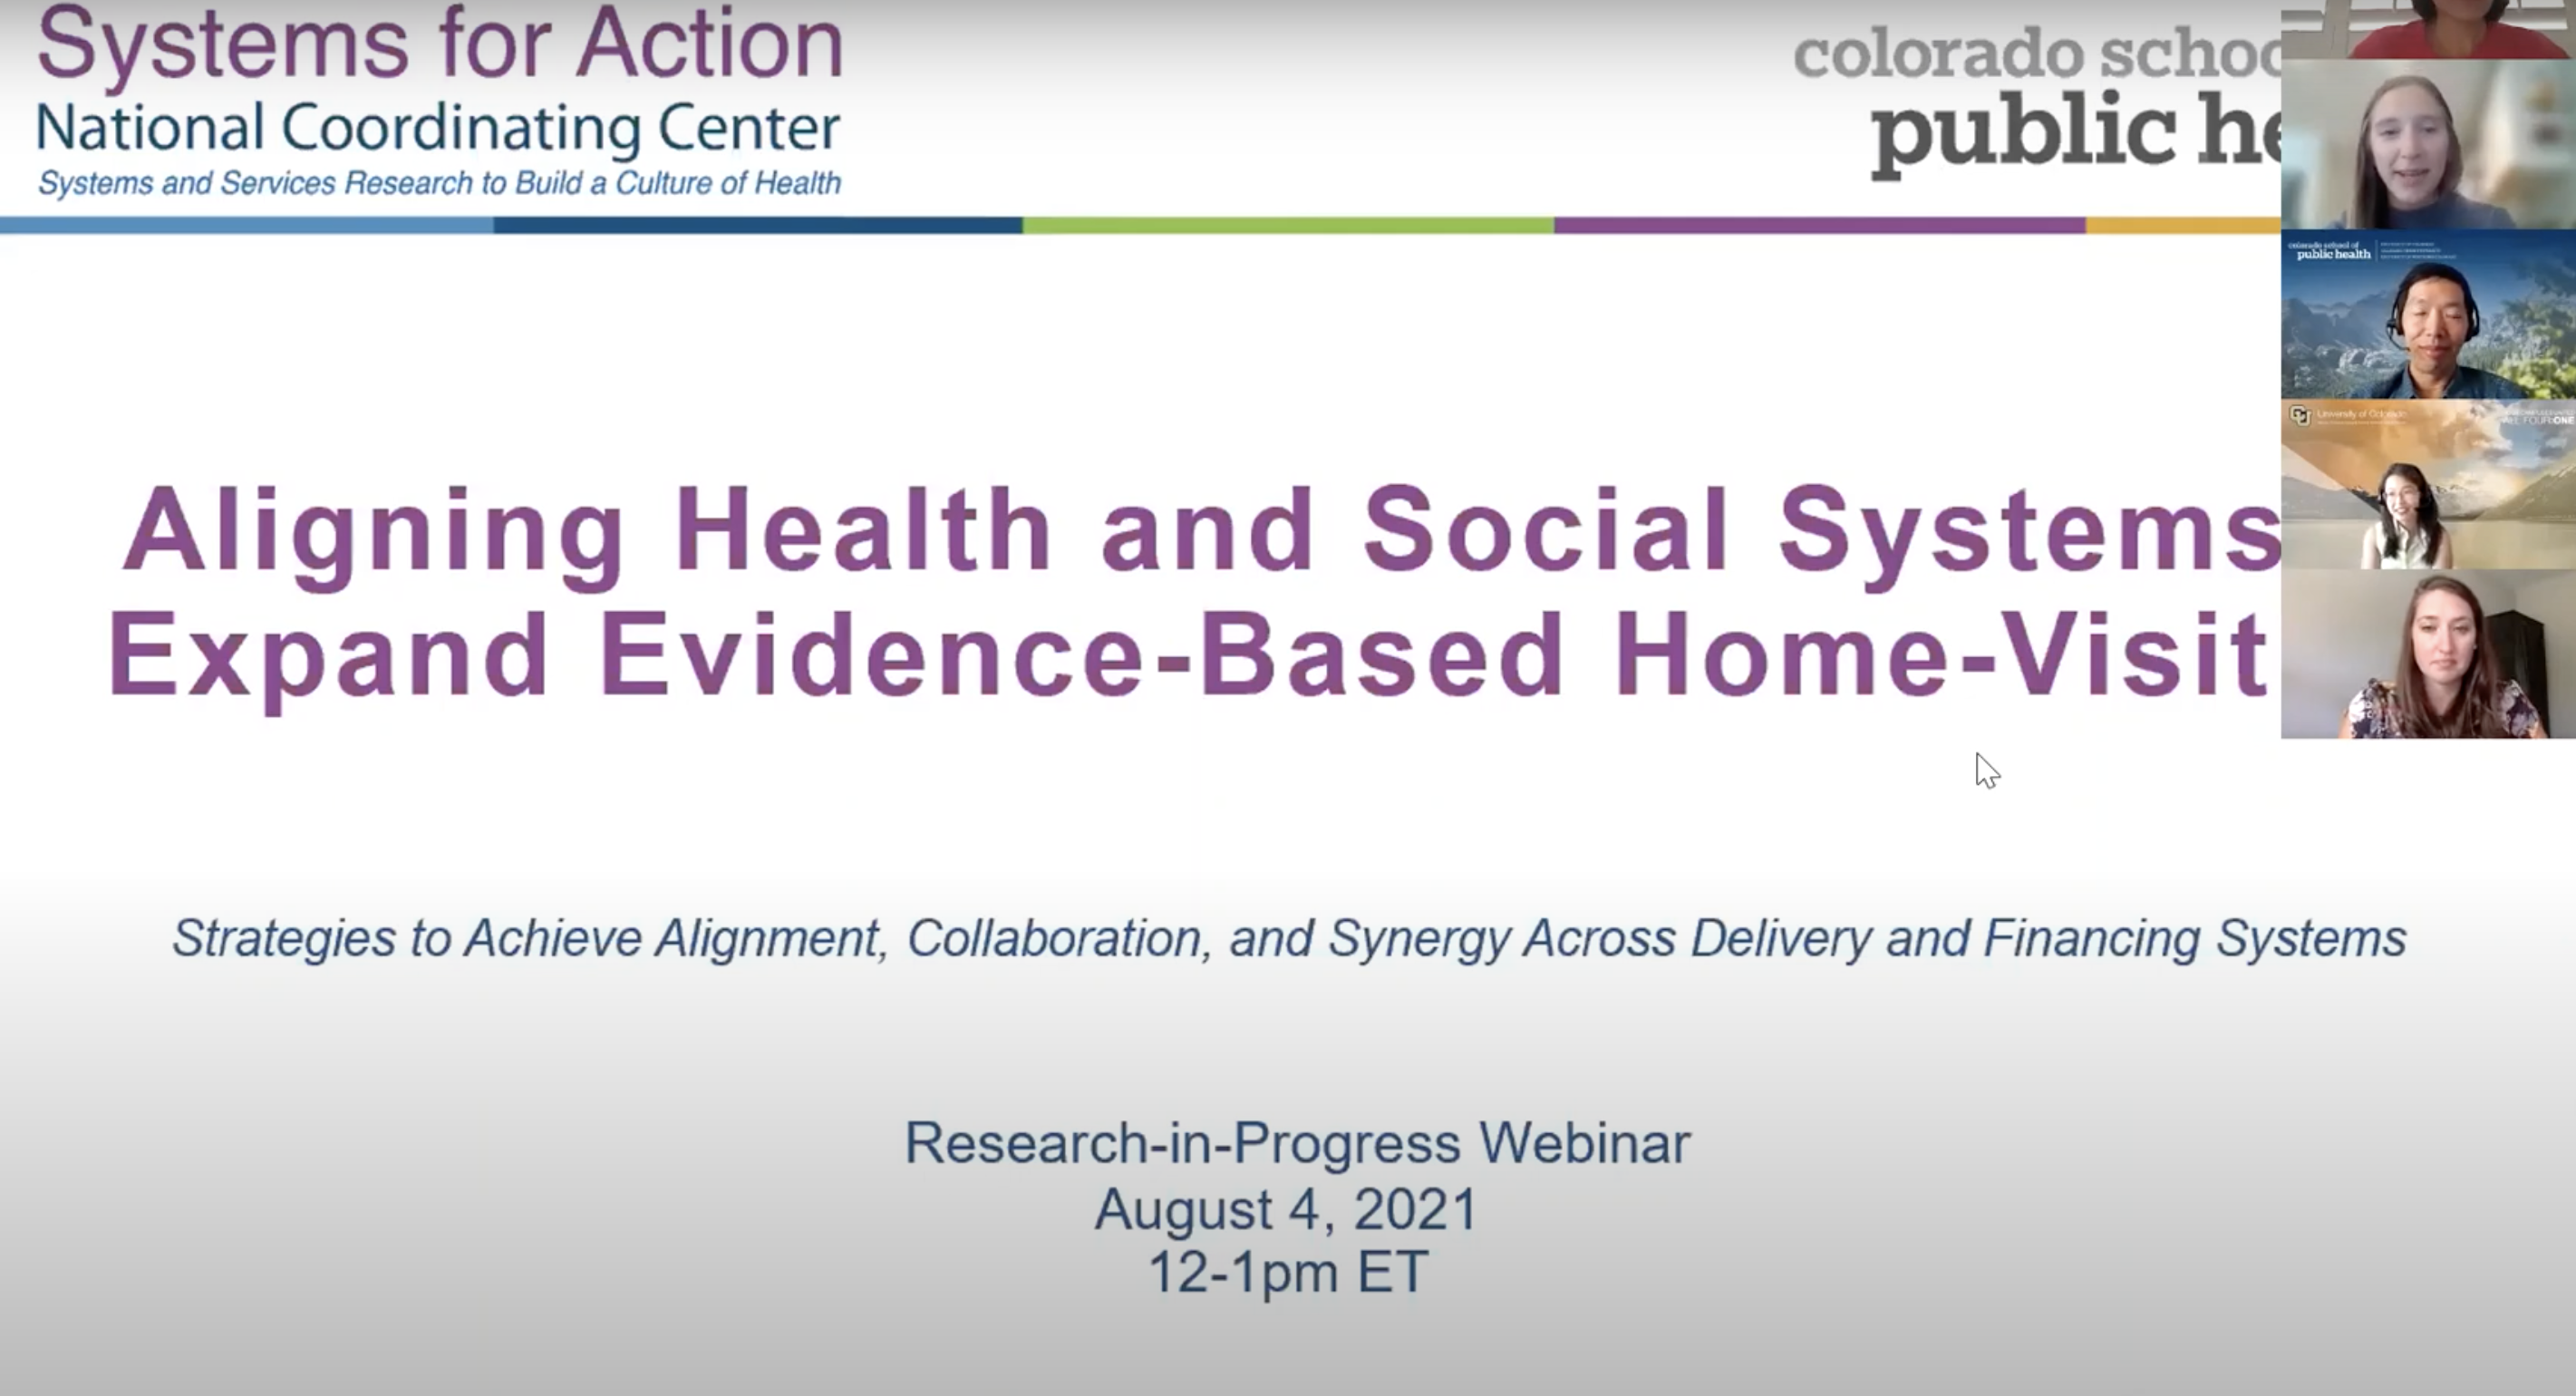 Aligning Health and Social Systems to Expand Evidence-Based Home-Visiting